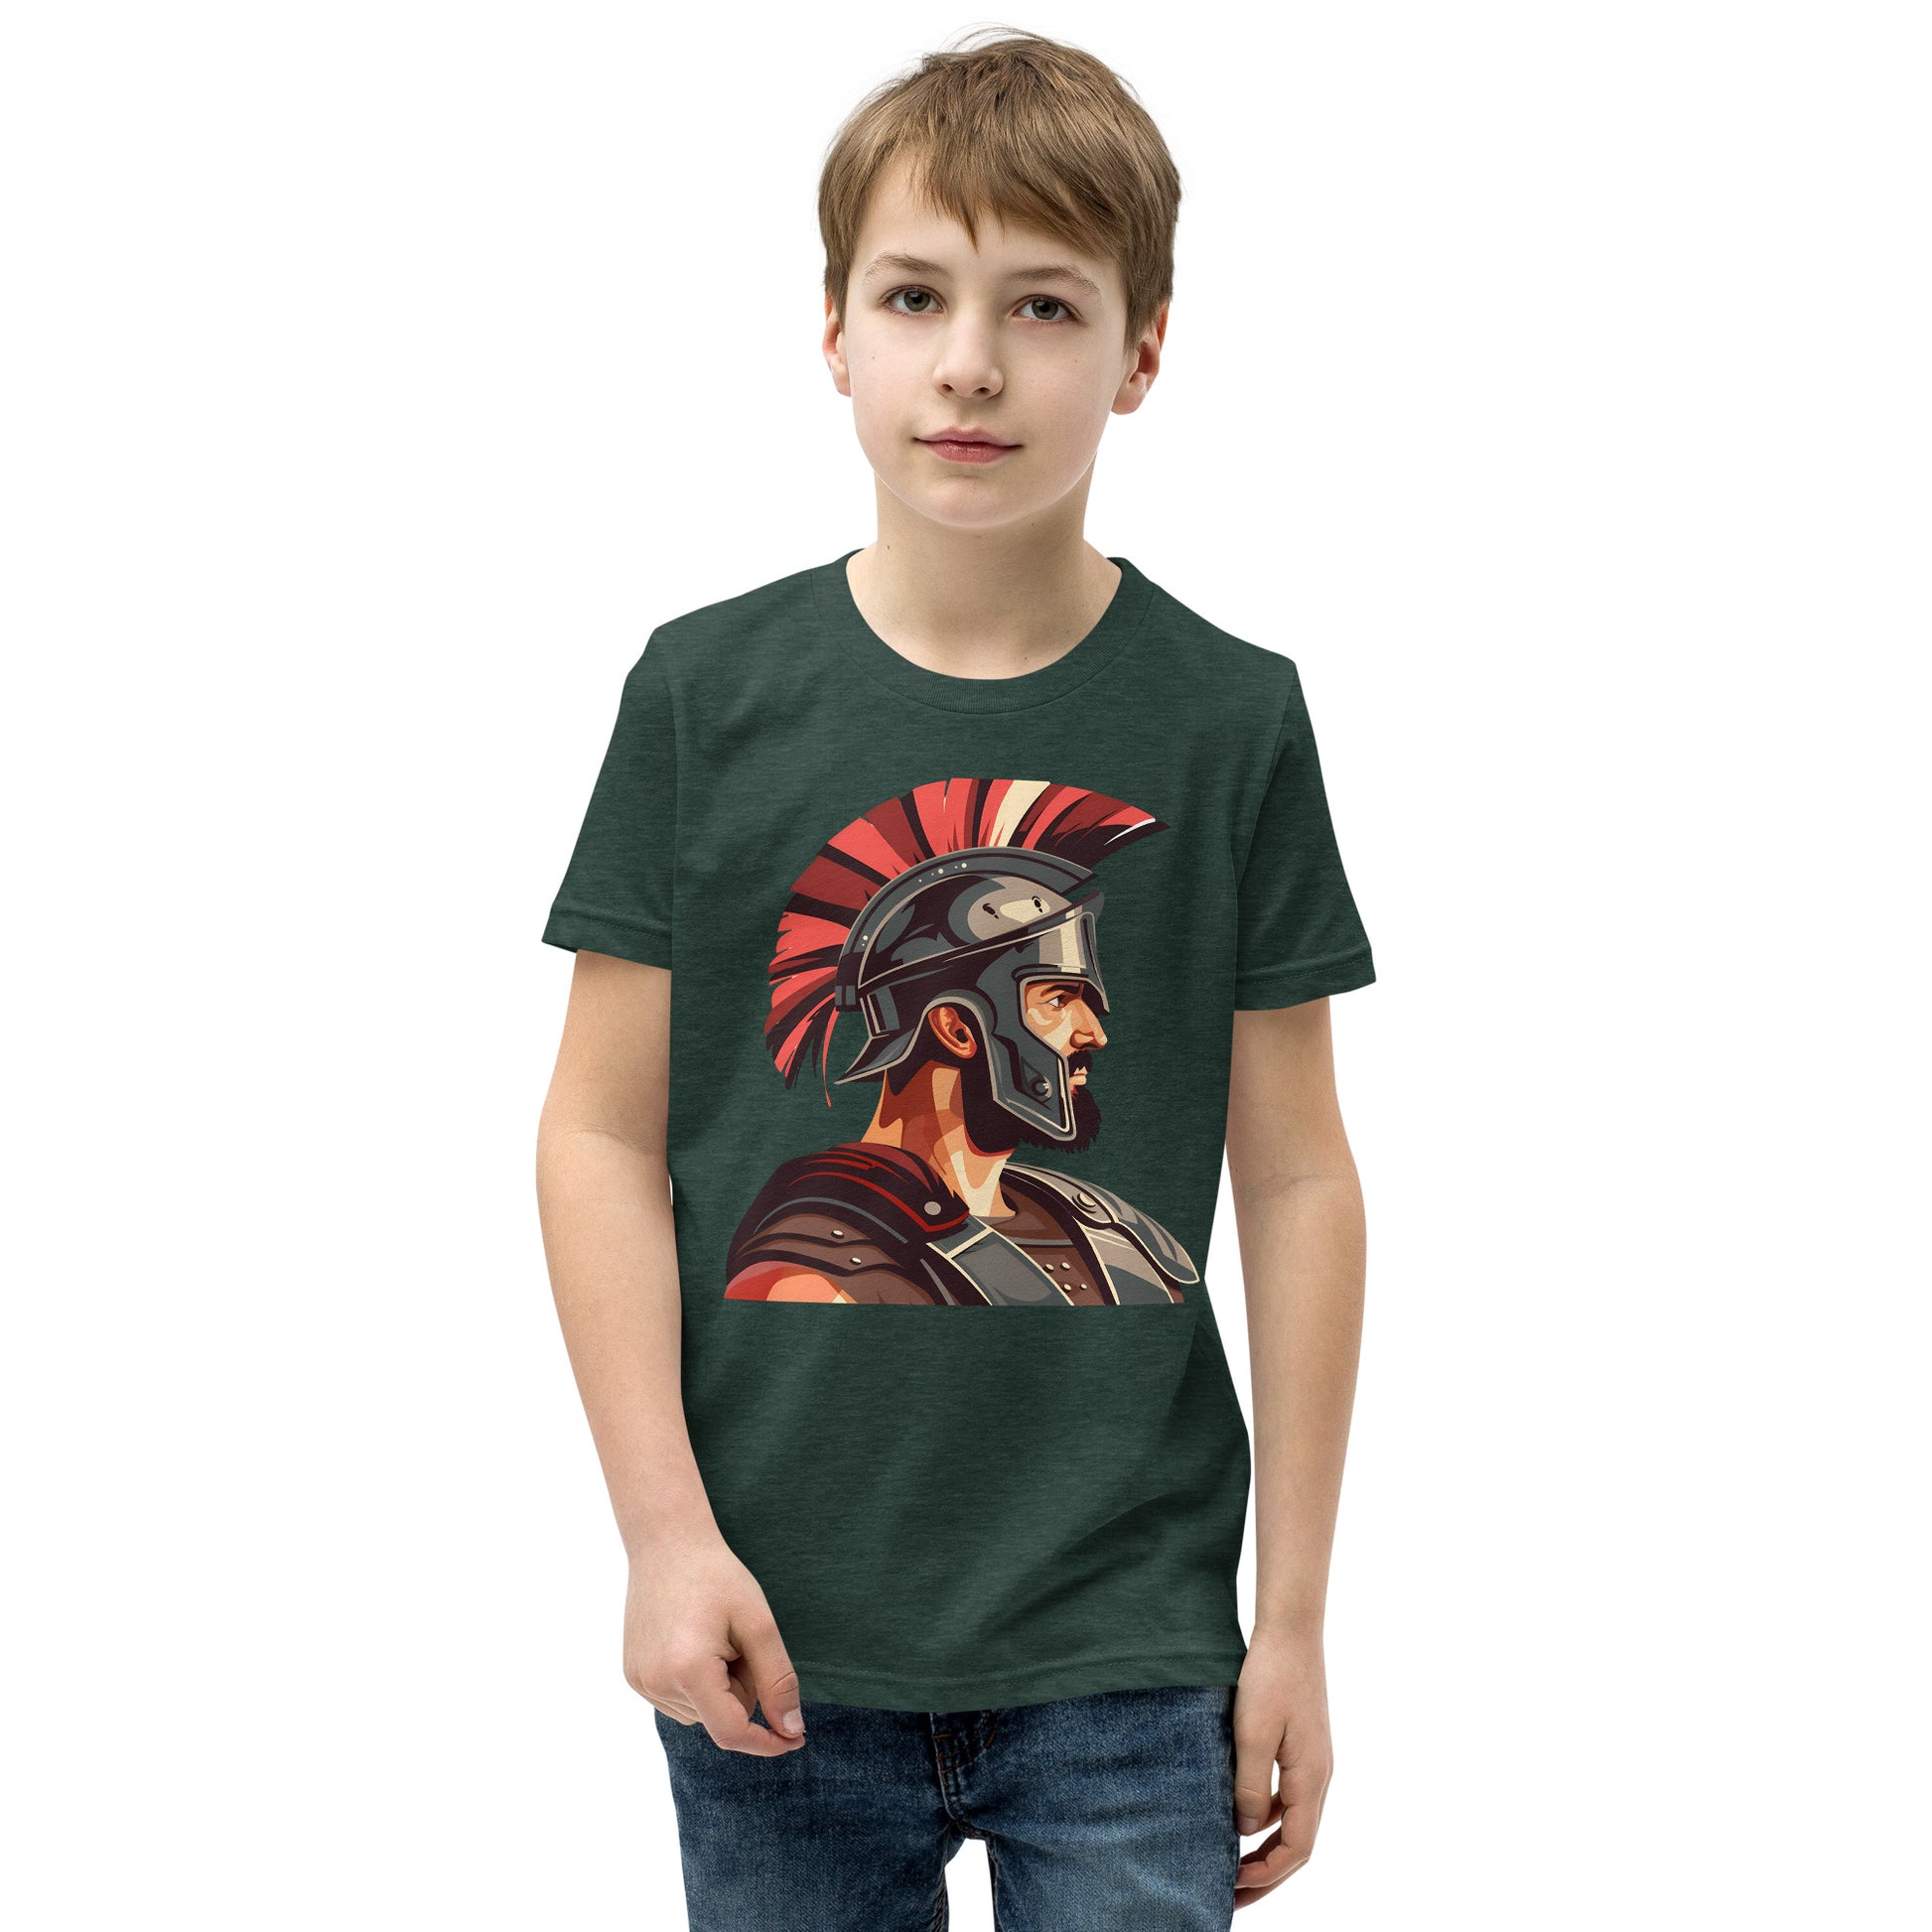 Teenager with a forest green T-shirt with a print of a warrior